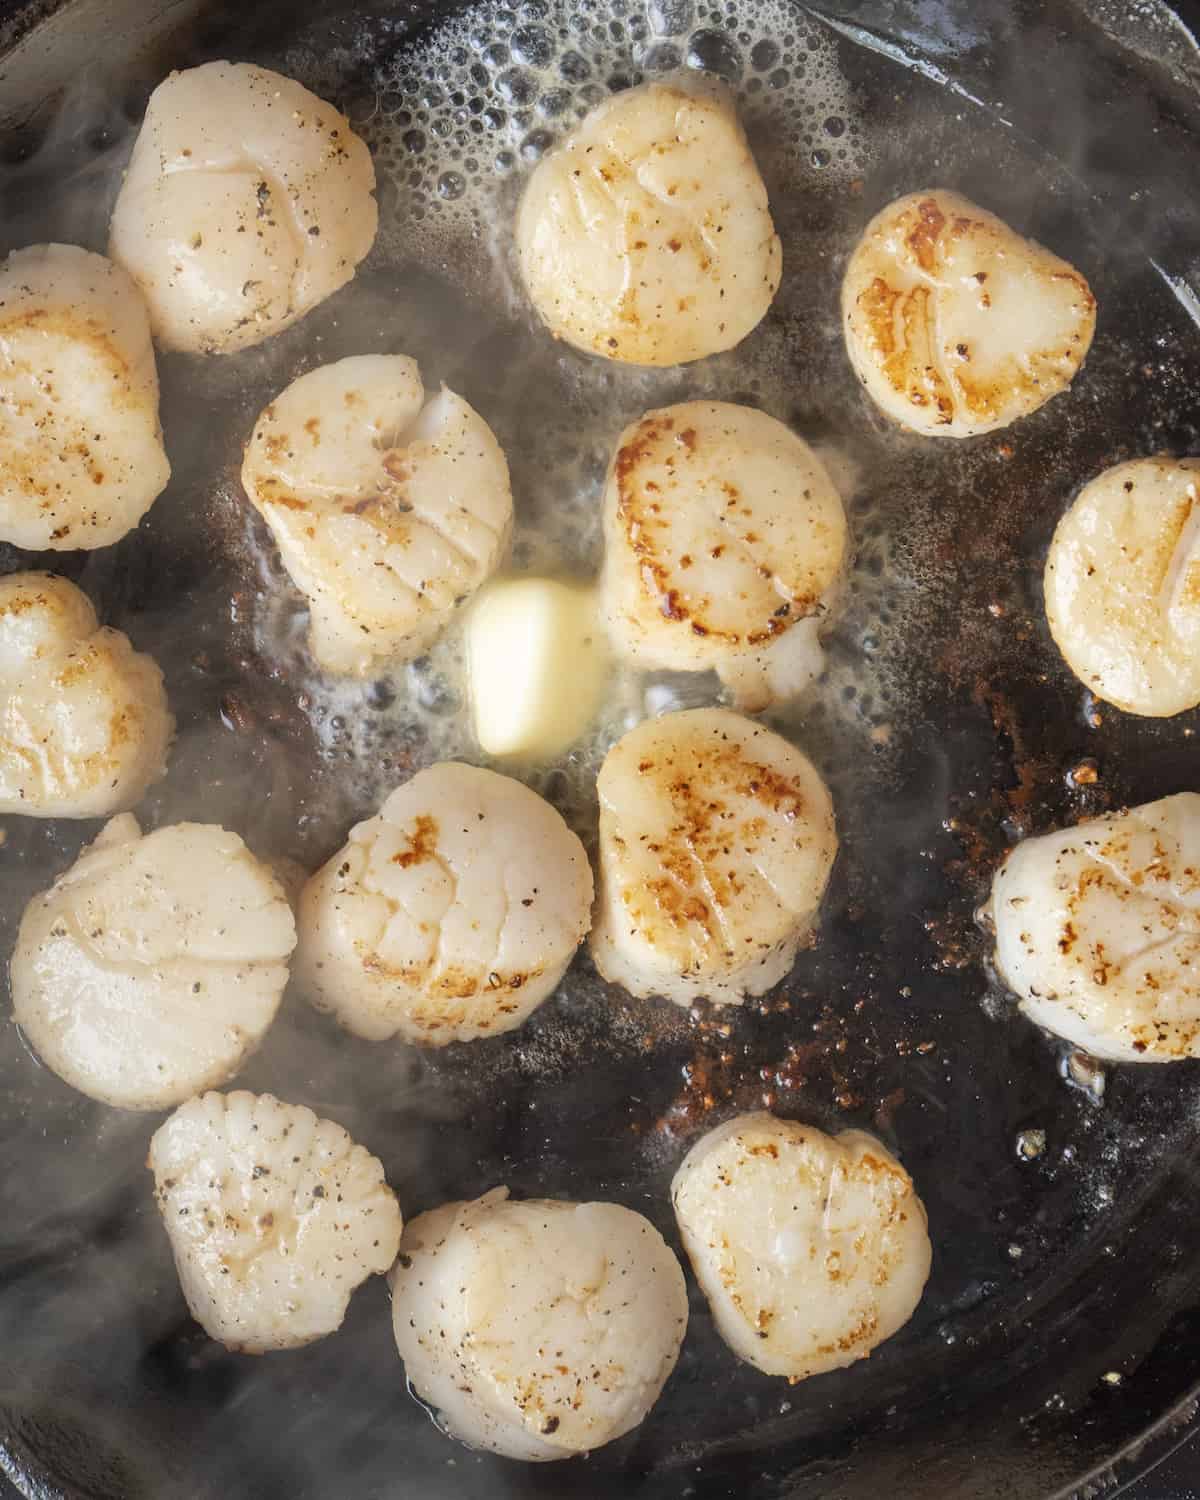 15 seared scallops on a cast iron skillet with a knob of butter that was just added and is starting to sizzle